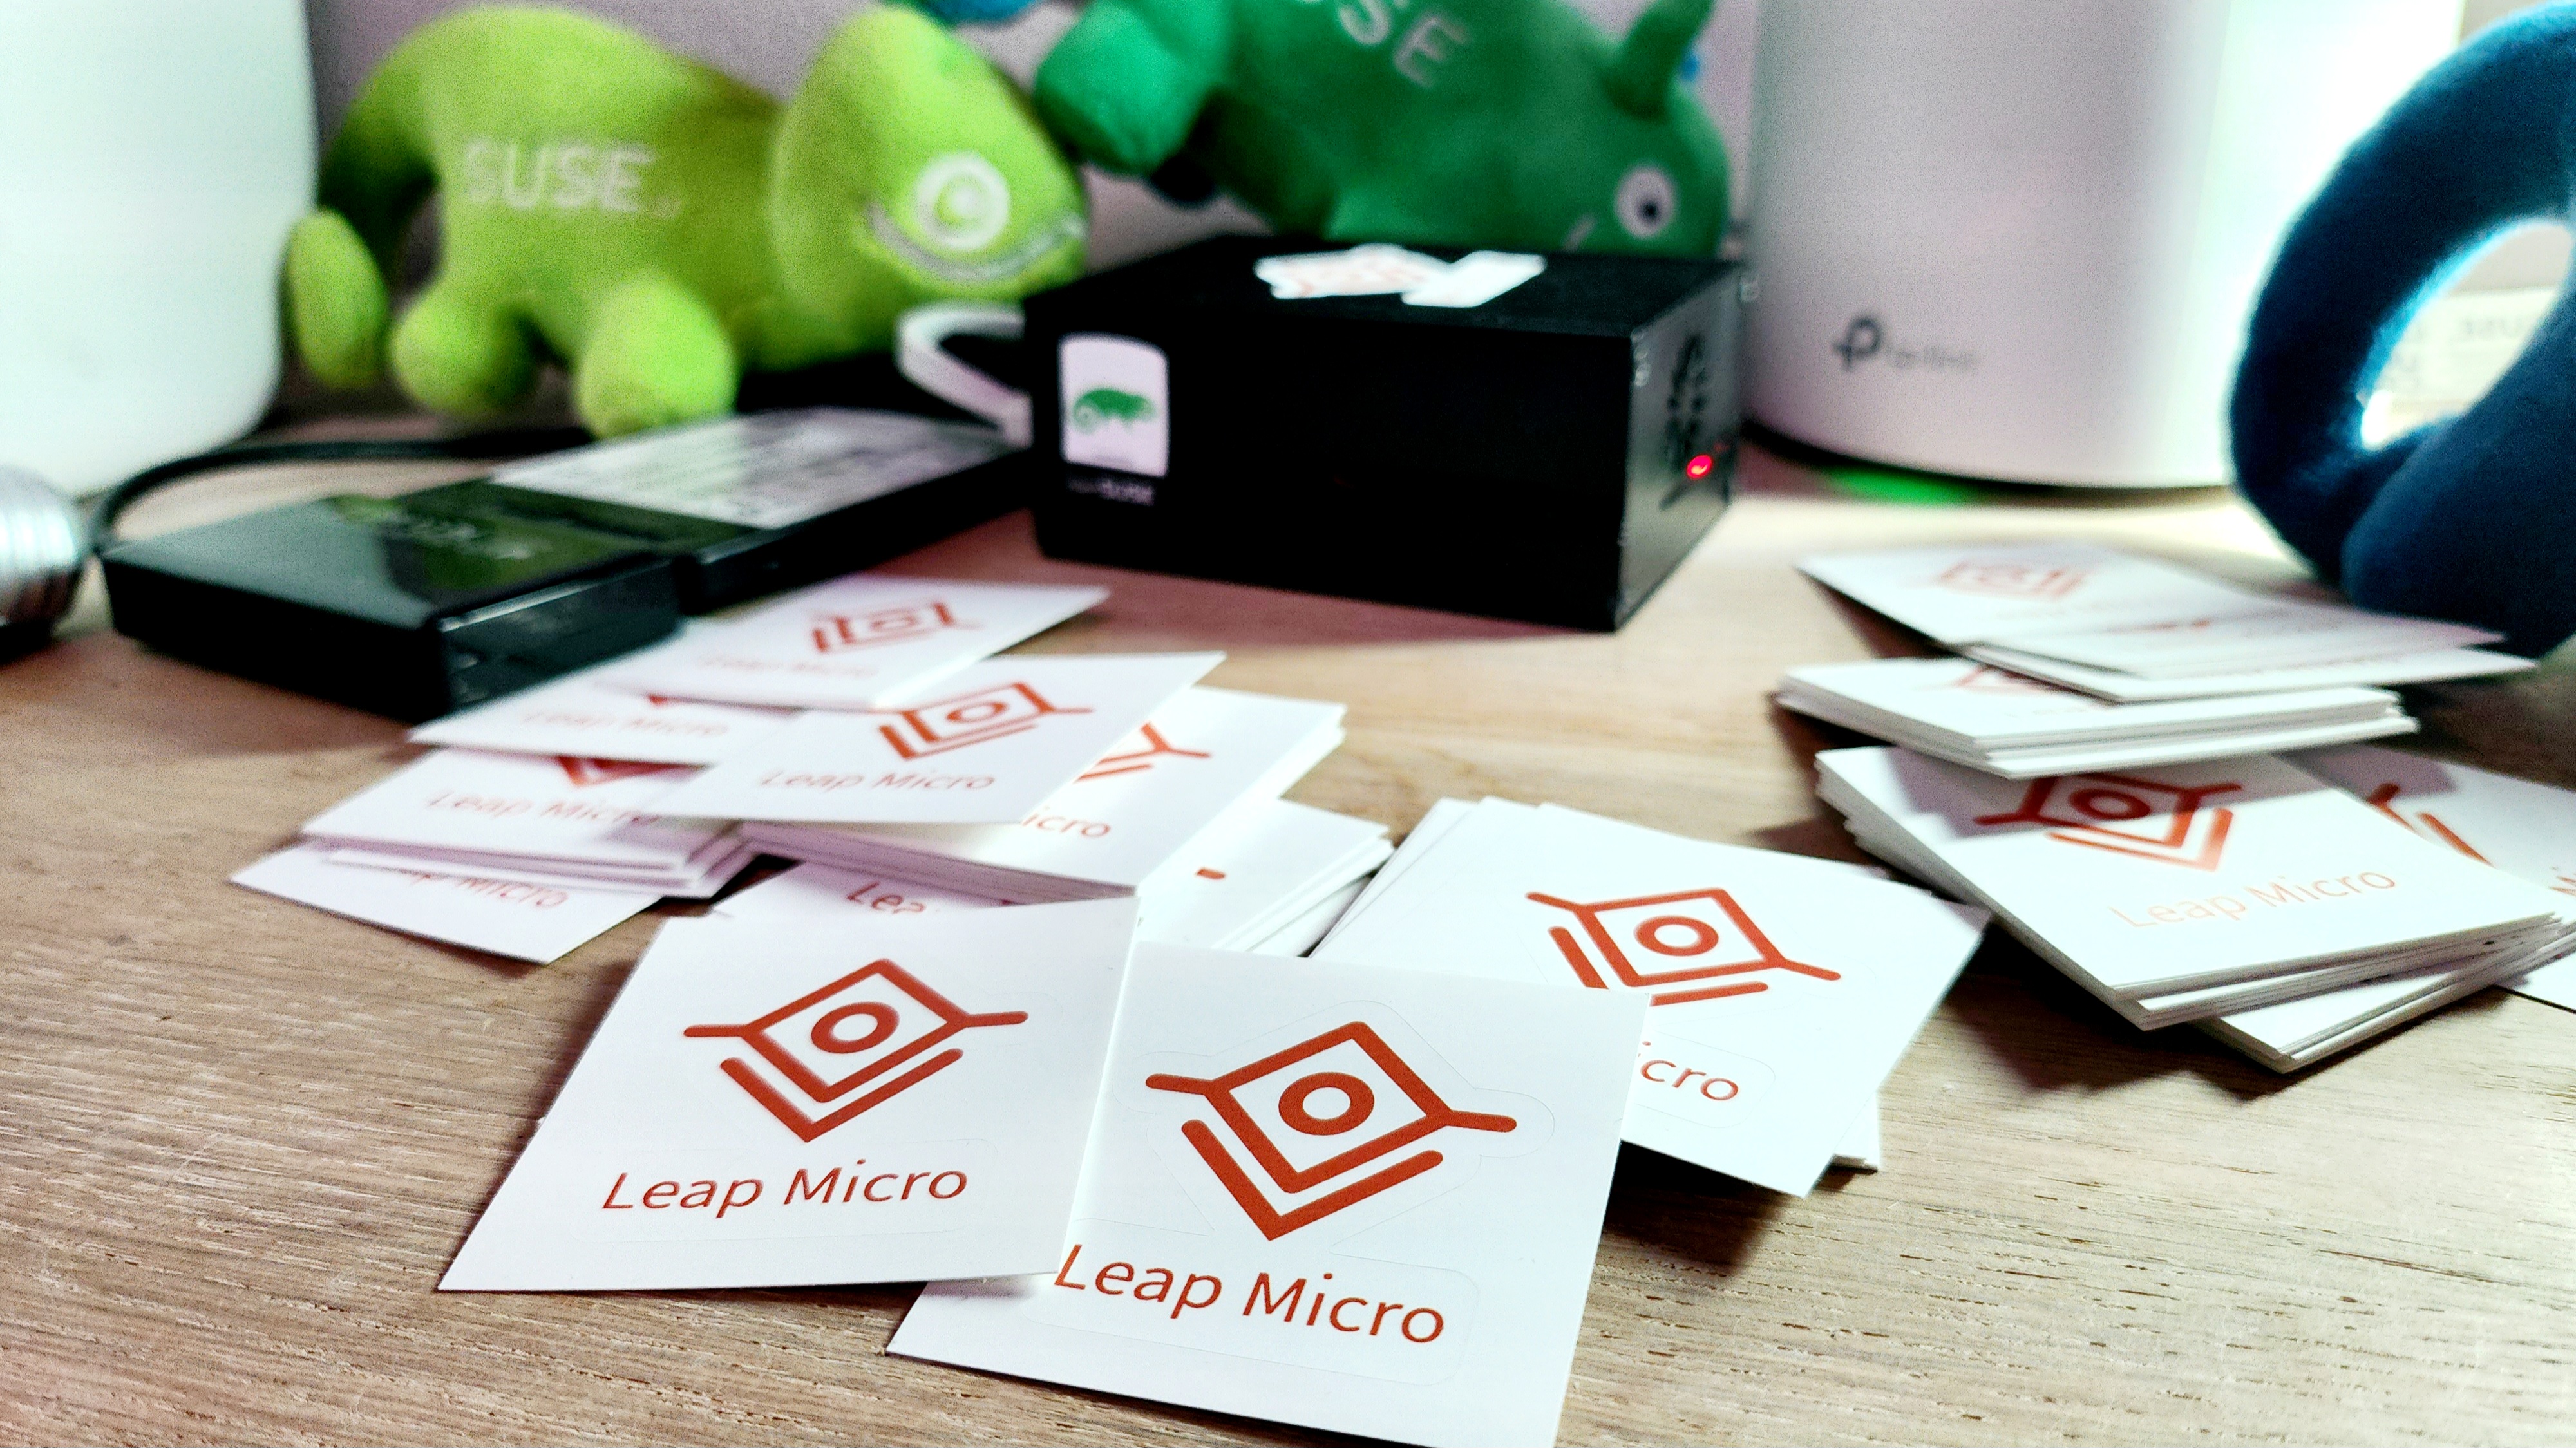 Leap Micro 6 Enters Alpha Stage